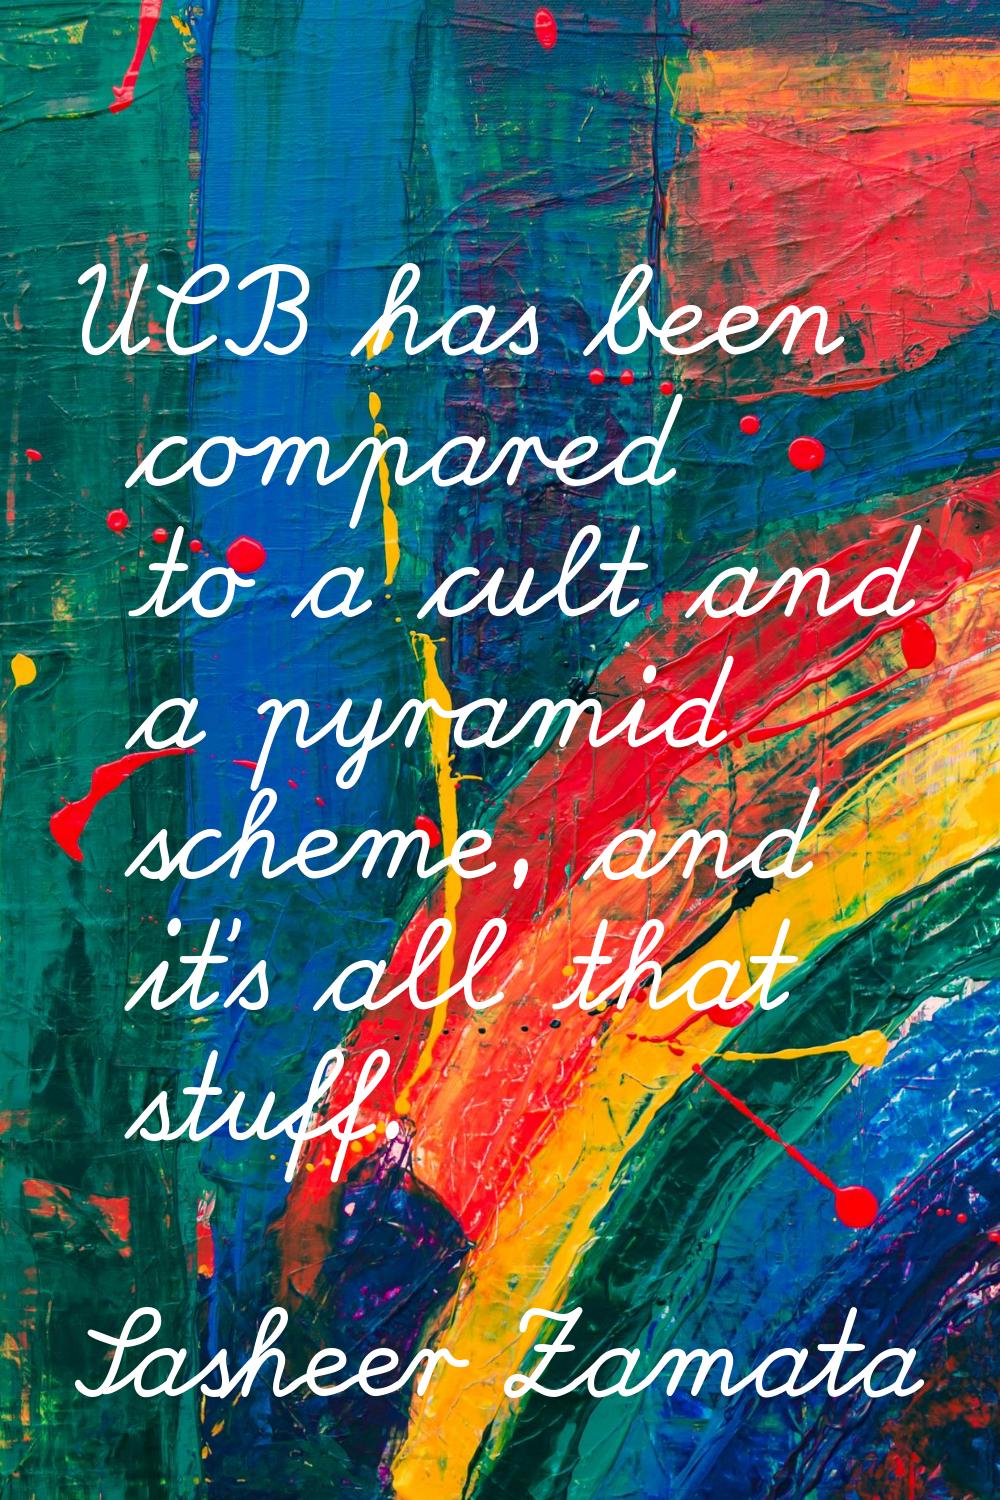 UCB has been compared to a cult and a pyramid scheme, and it's all that stuff.